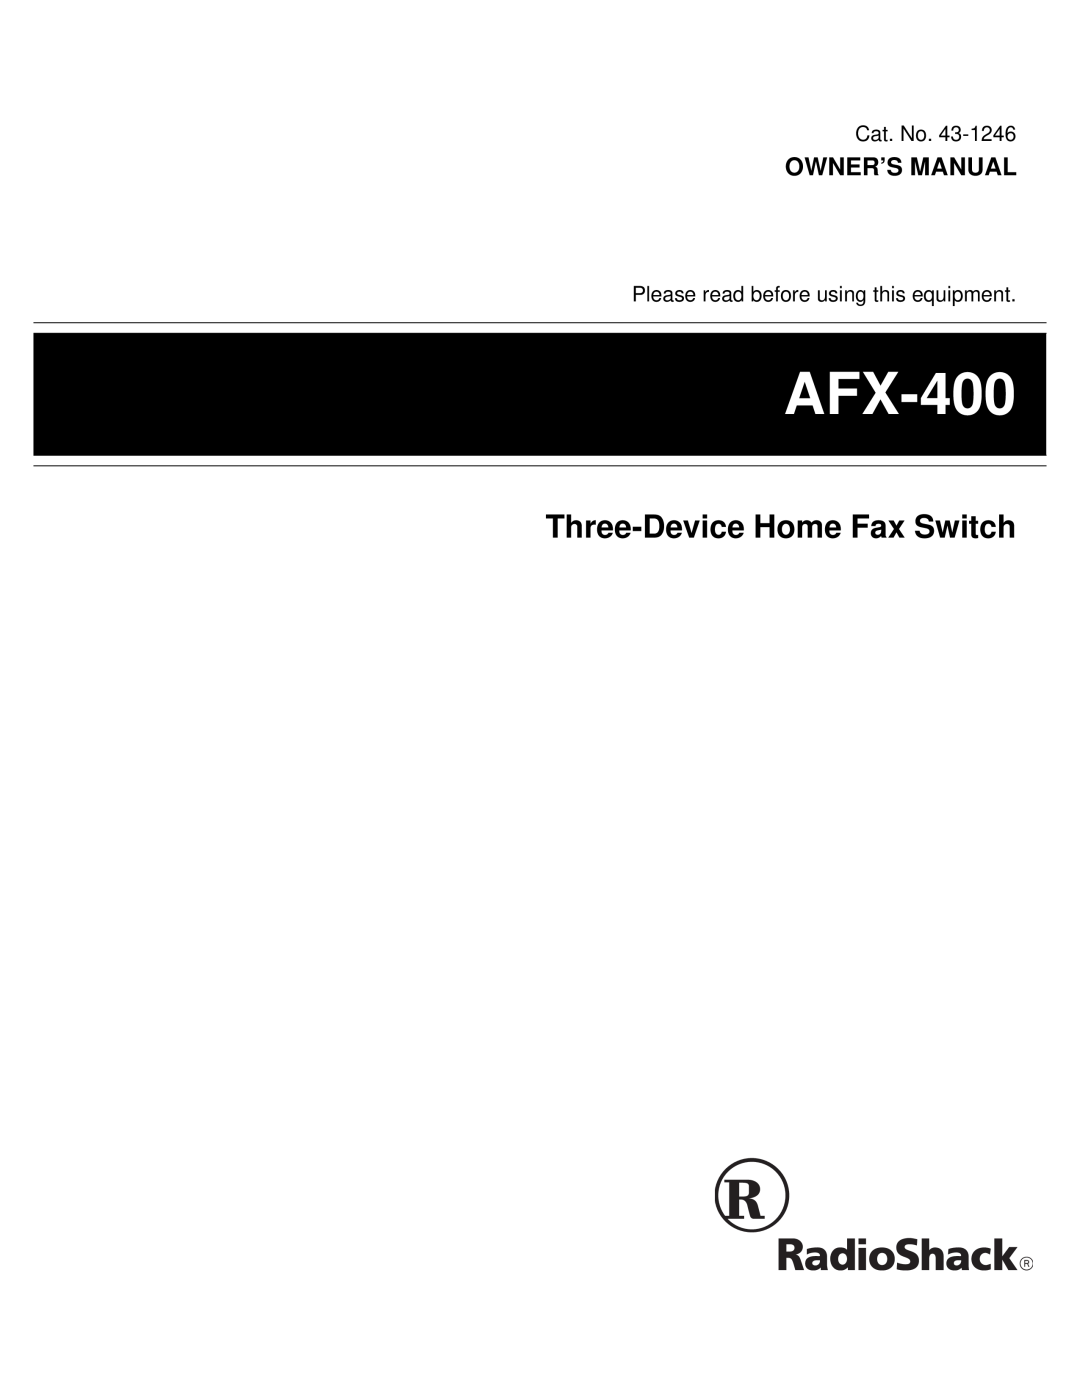 Radio Shack AFX-400 owner manual Owner’S Manual, Three-Device Home Fax Switch, Cat. No 